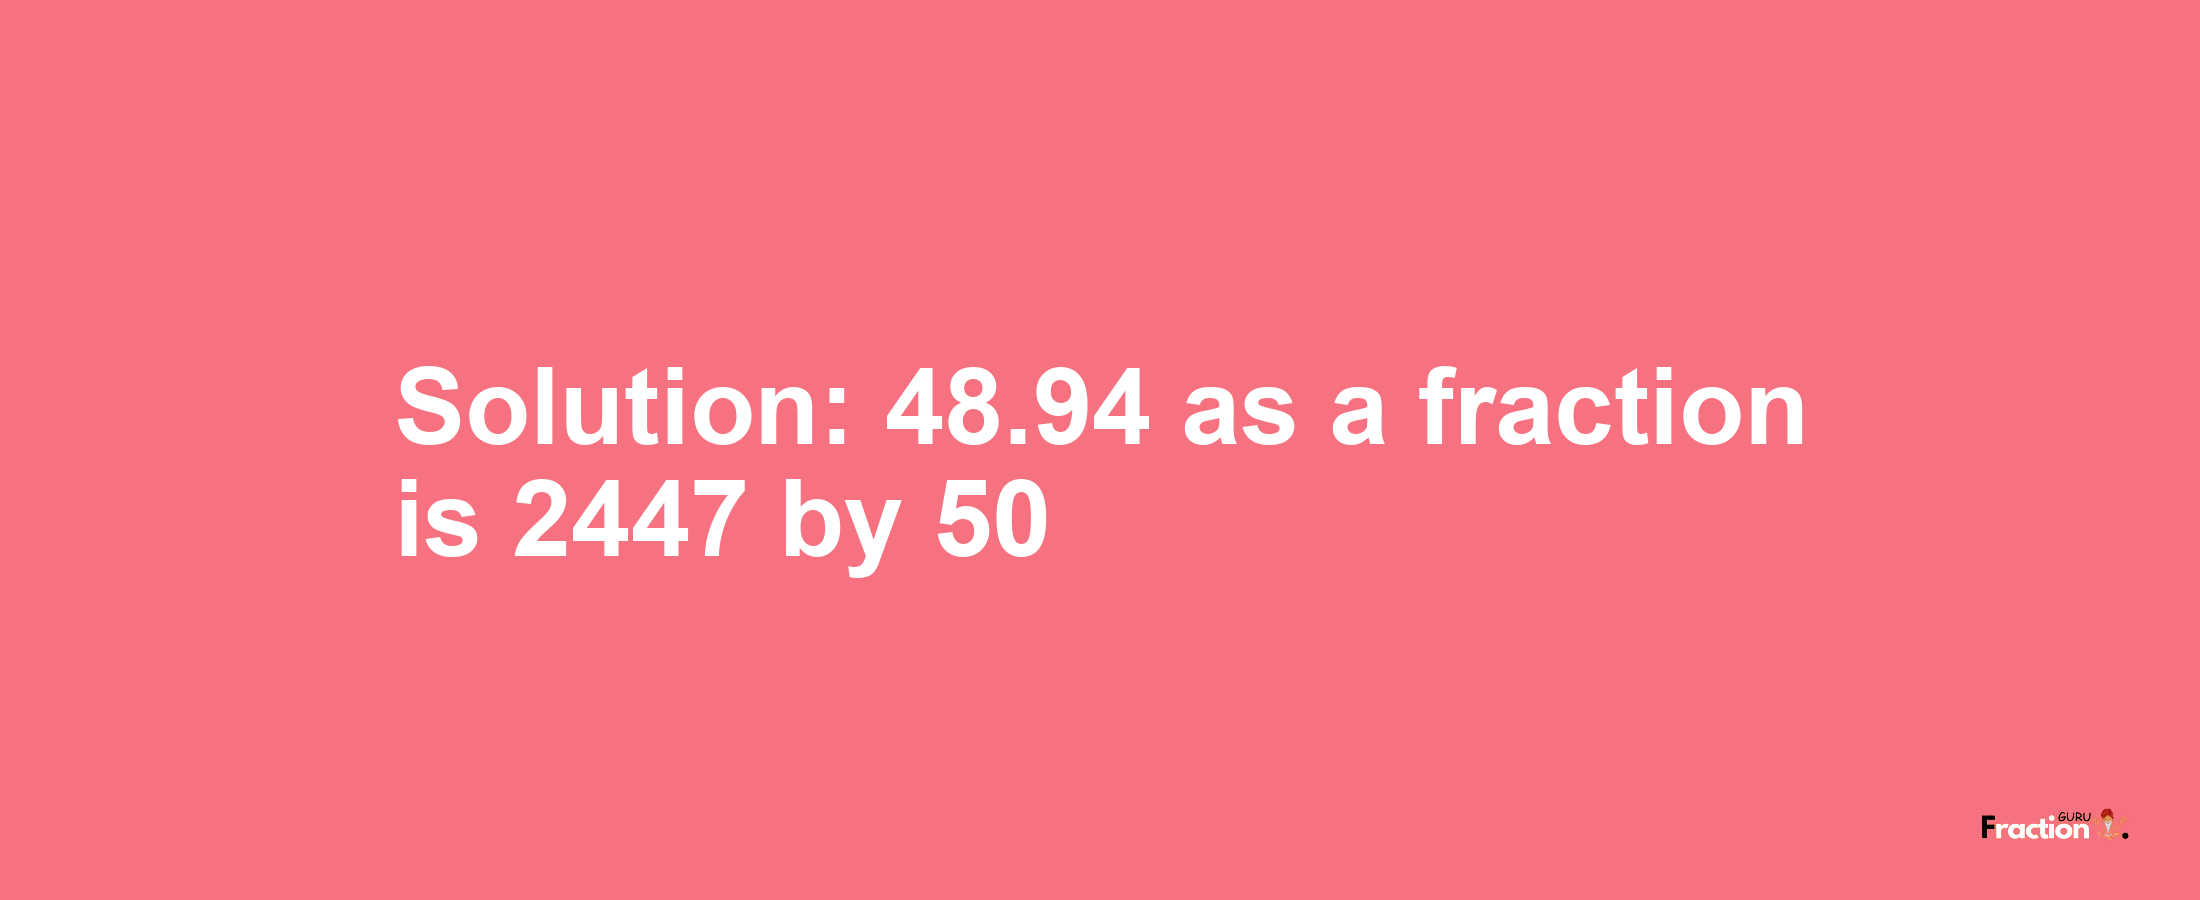 Solution:48.94 as a fraction is 2447/50